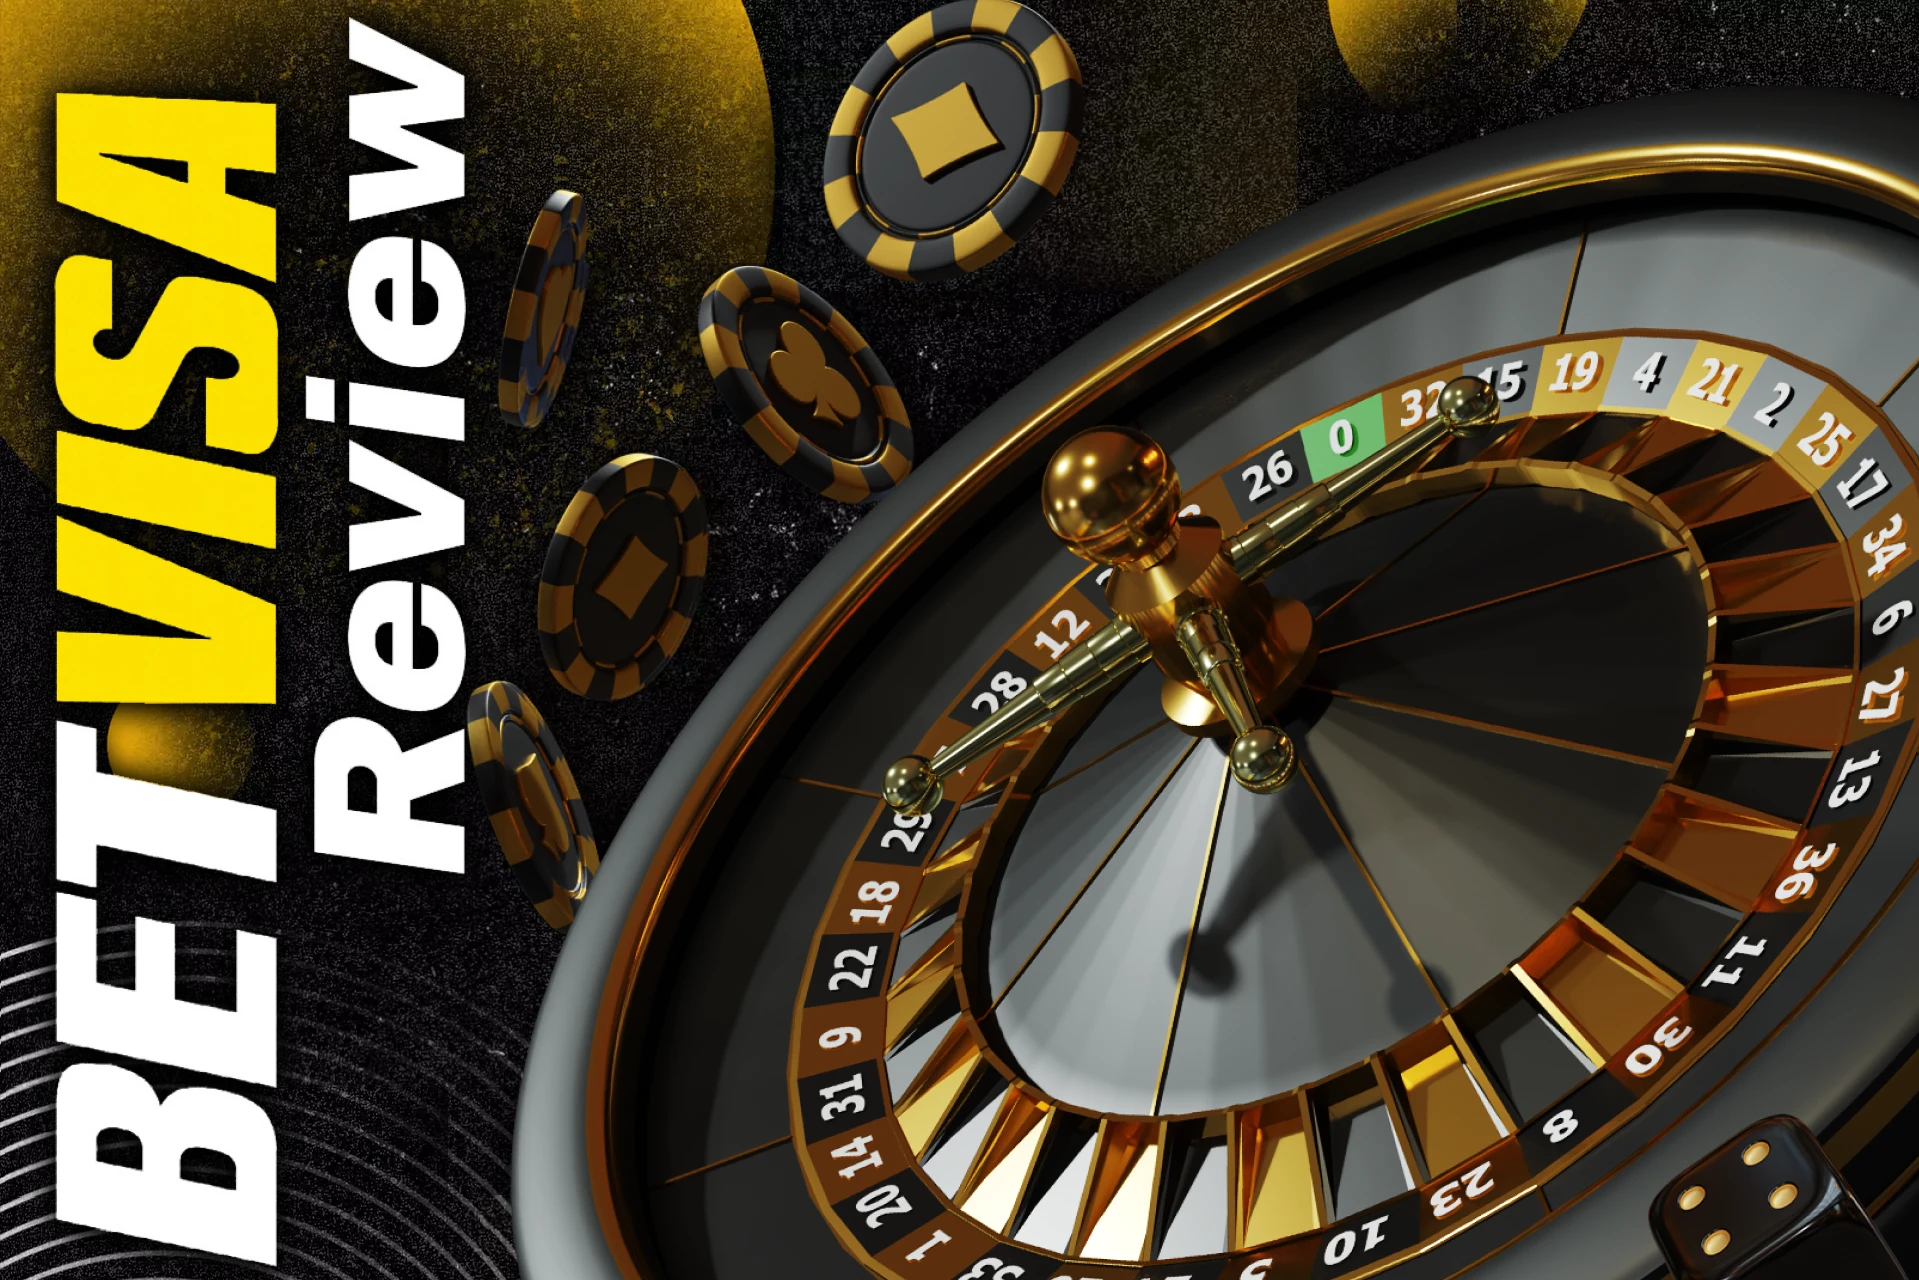 You can play differen types of roulette at BetVisa.